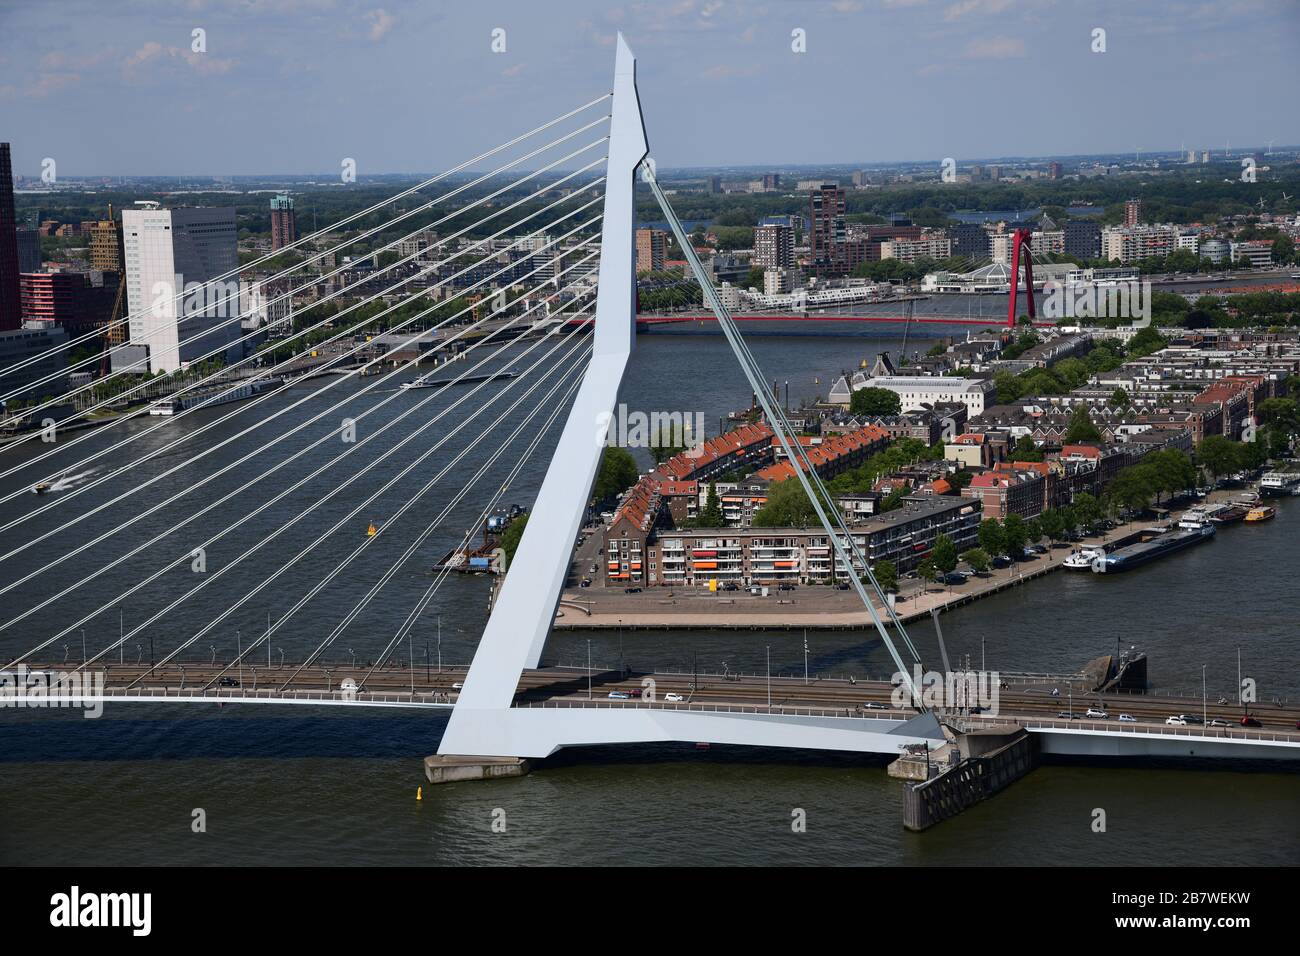 Overview of Rotterdam with in forefront the Erasmusbrug, Noordereiland, Willemsbrug, Maas river and even the Kralingse plassen on an extremely clear d Stock Photo